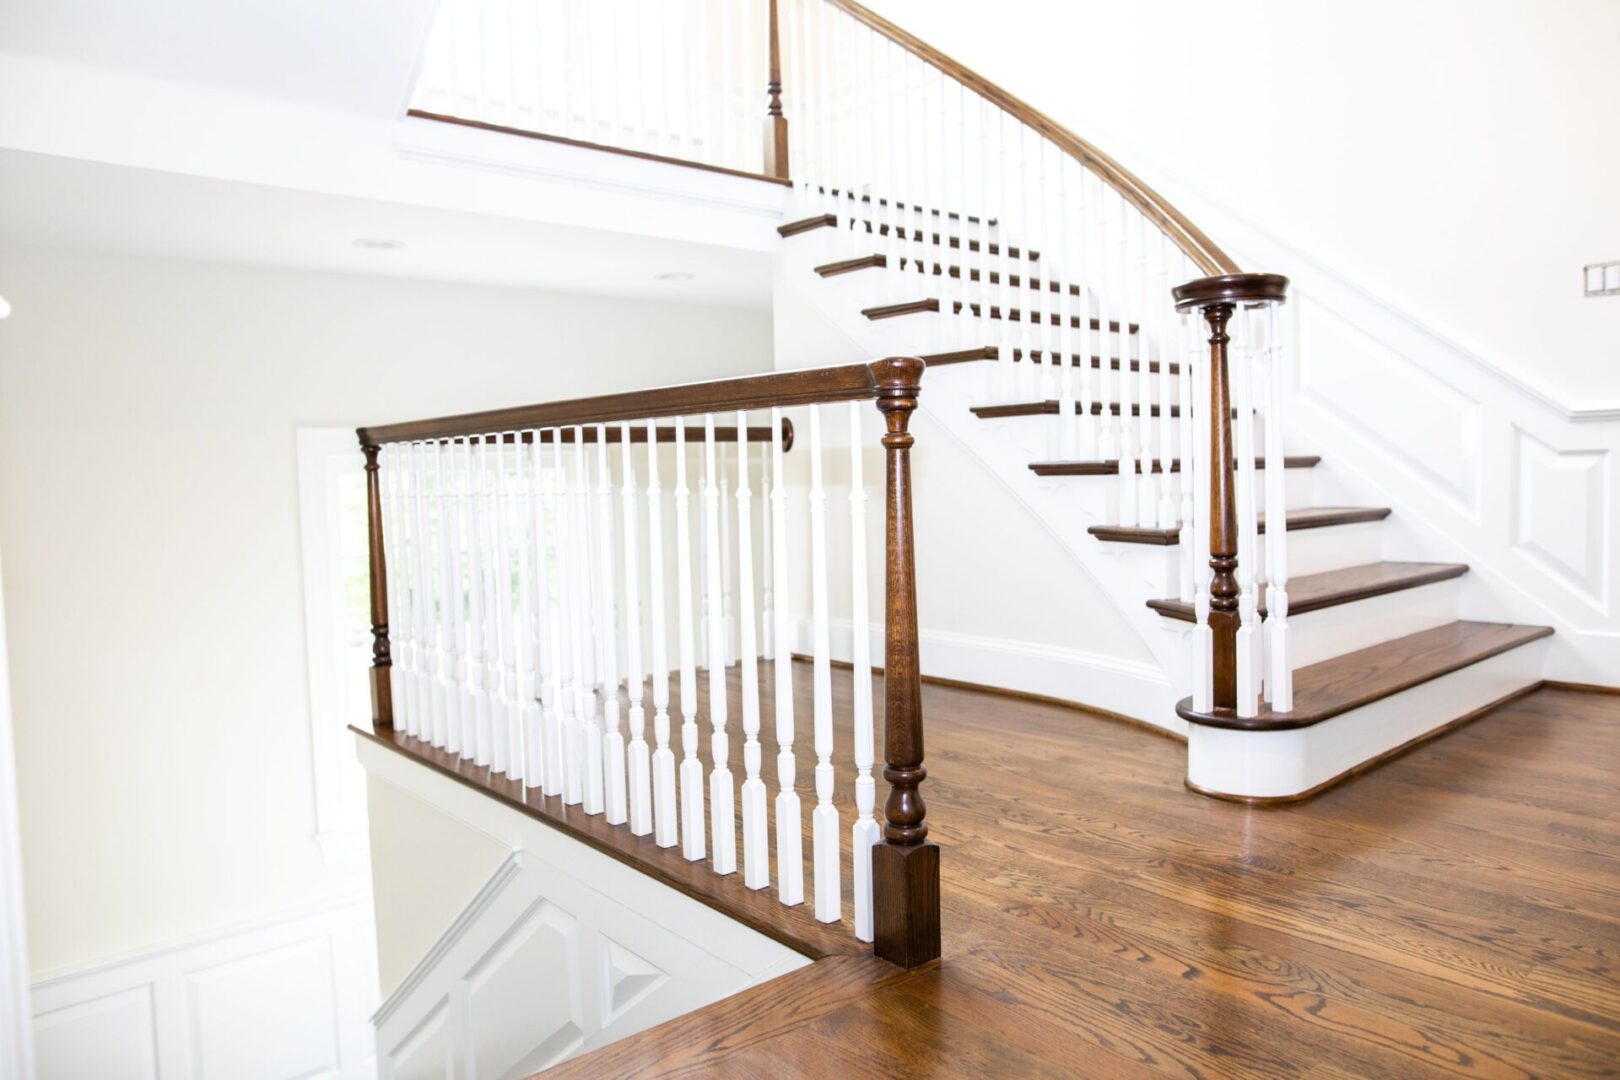 A wooden staircase with white railing and wood steps.